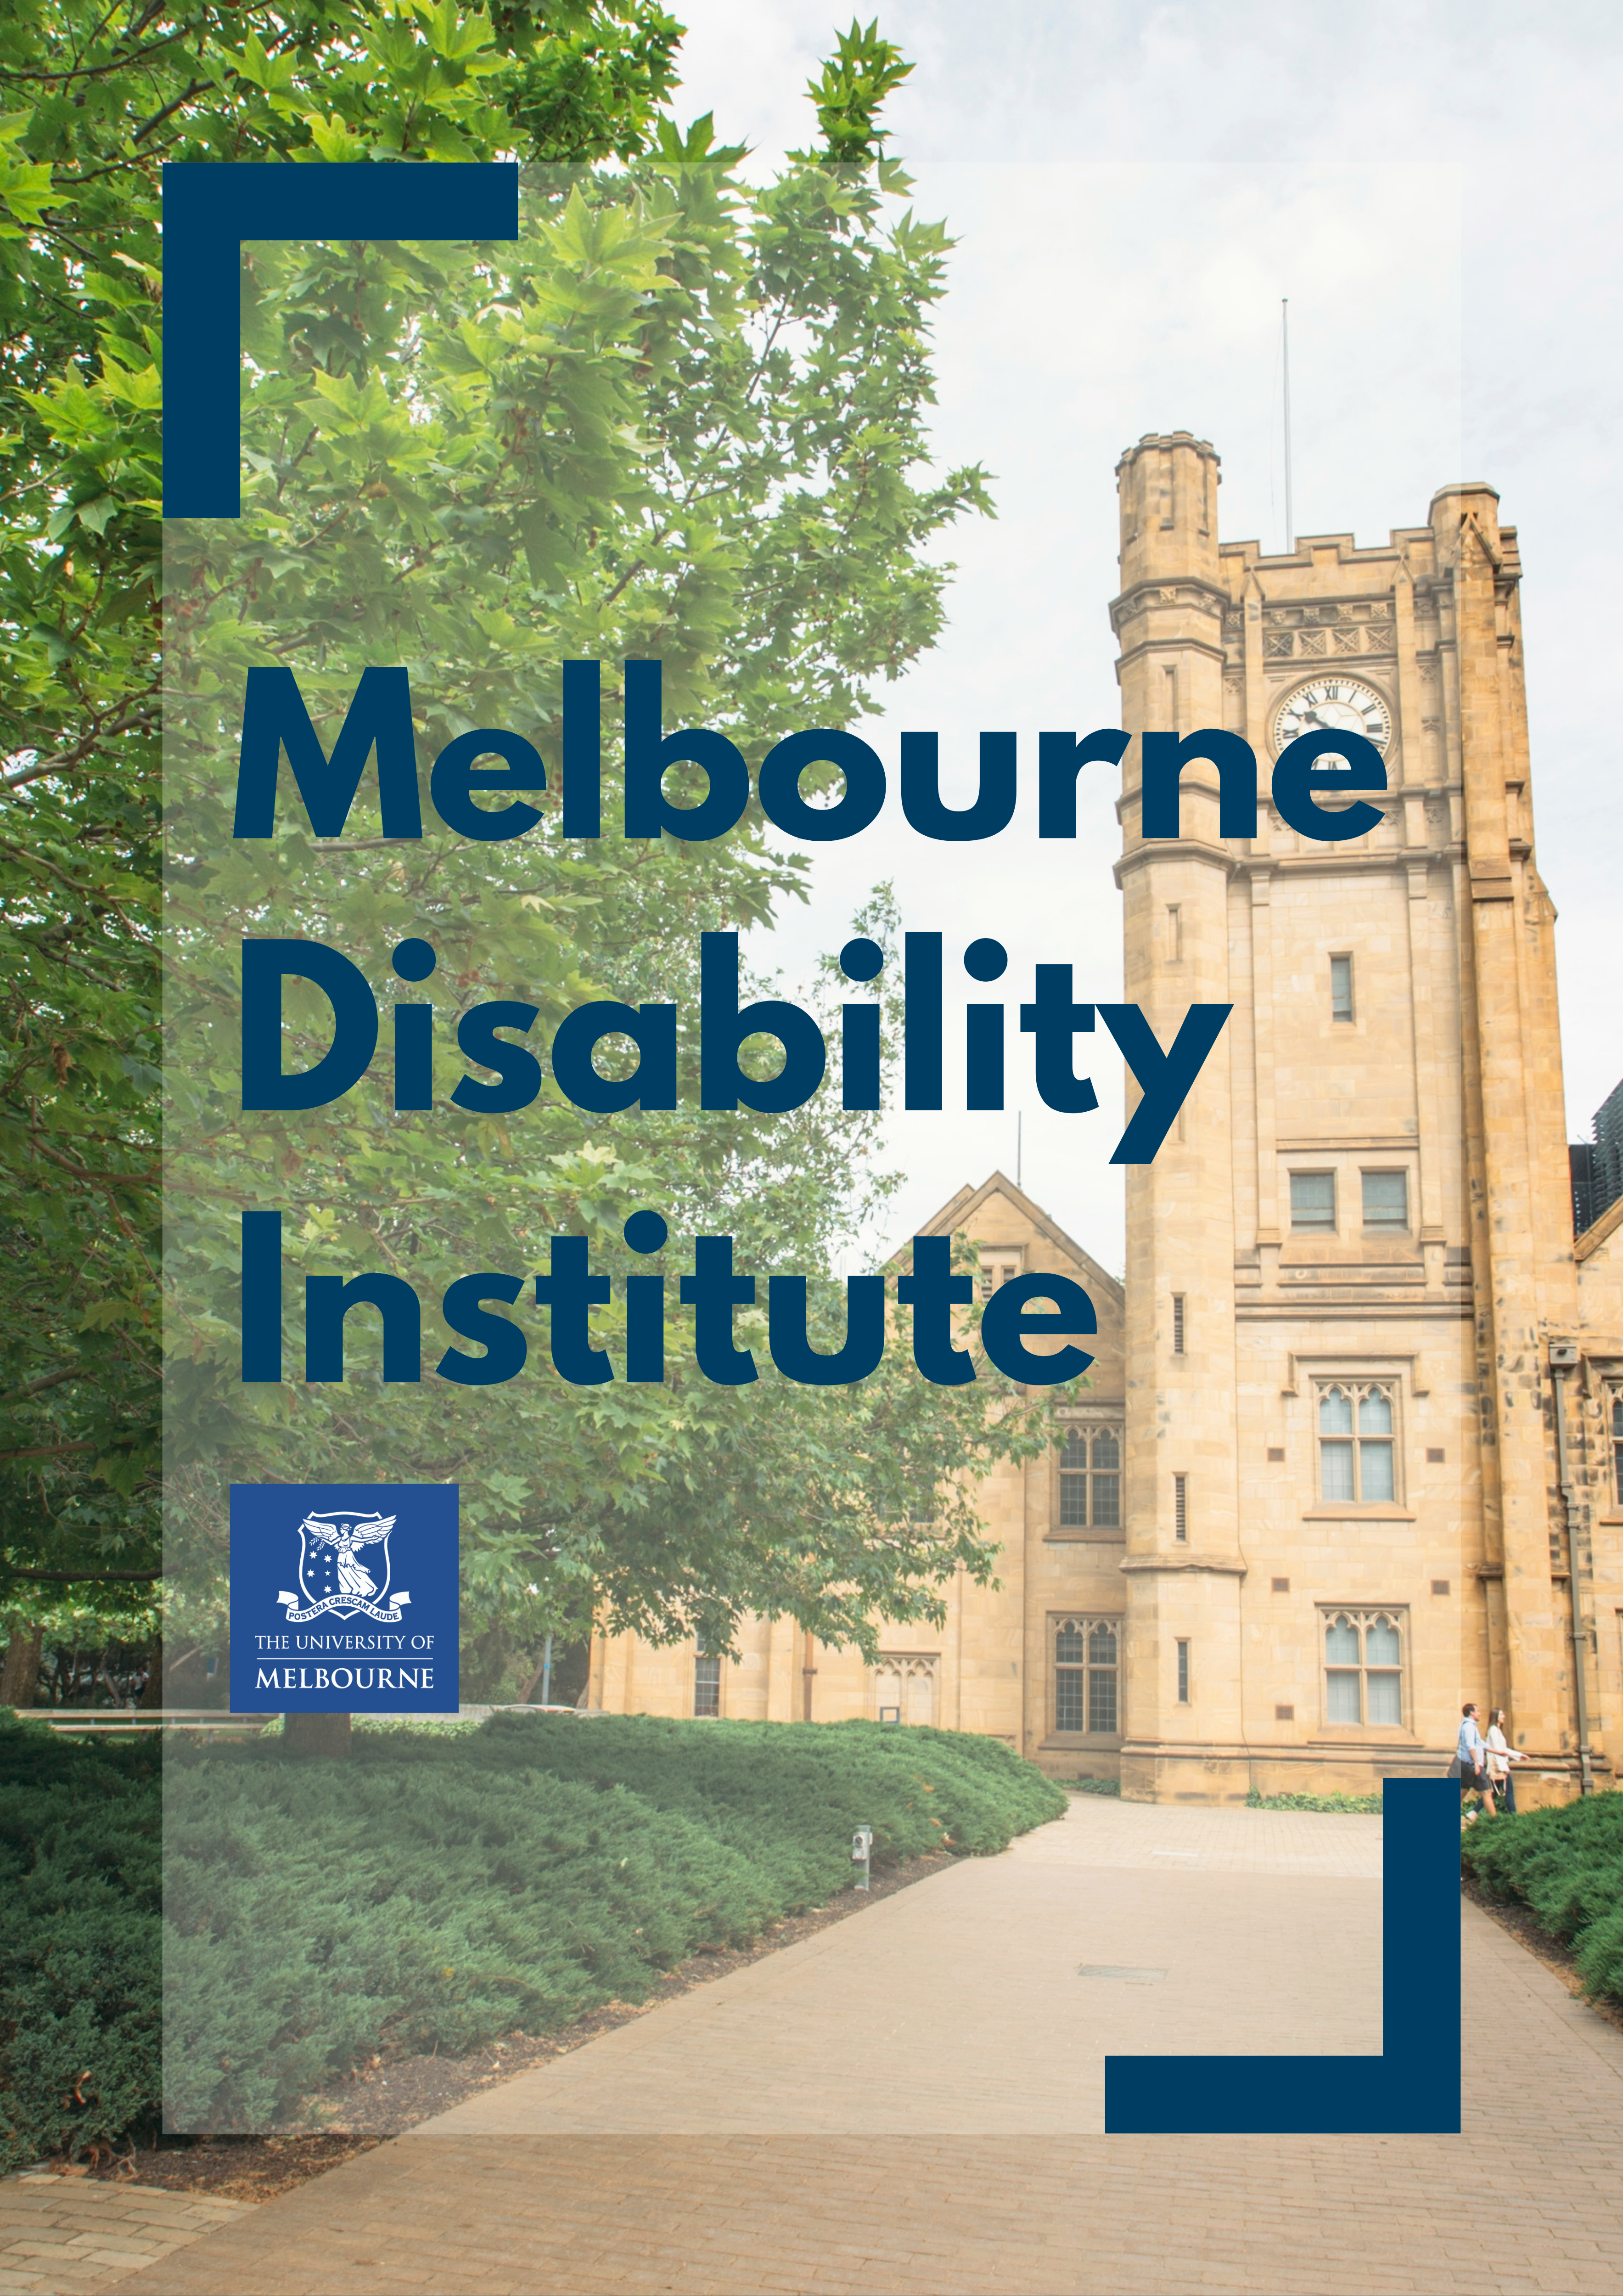 Welcome to the Melbourne Disability Institute